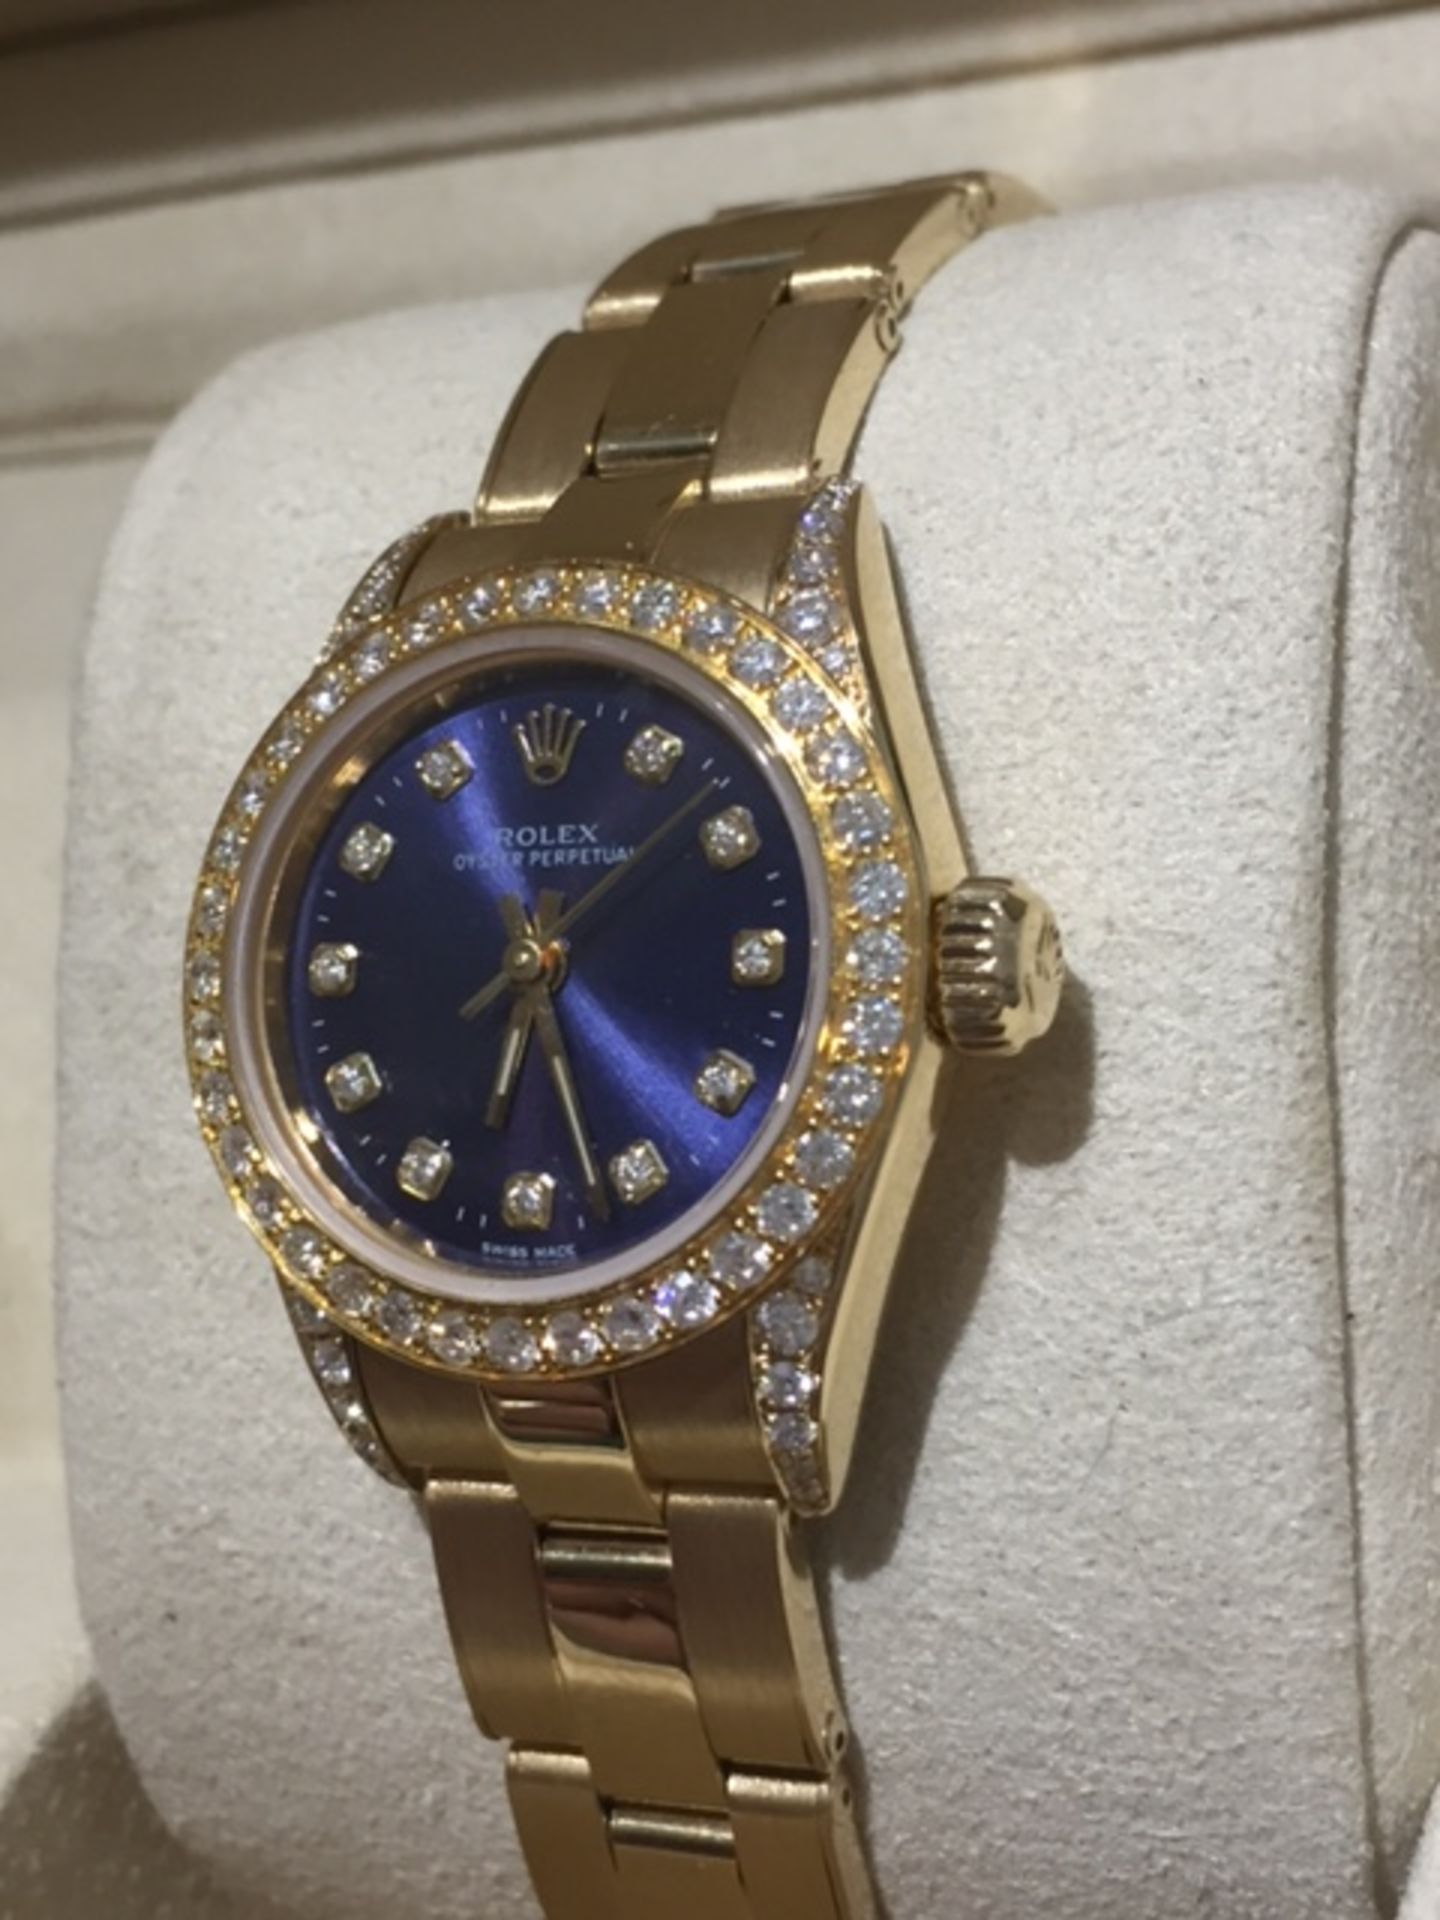 LADIES ROLEX 18ct SOLID GOLD OYSTER PERPETUAL AFTER SET WITH DIAMOND DIAL, DIAMOND BEZEL, DIAMOND - Image 2 of 6